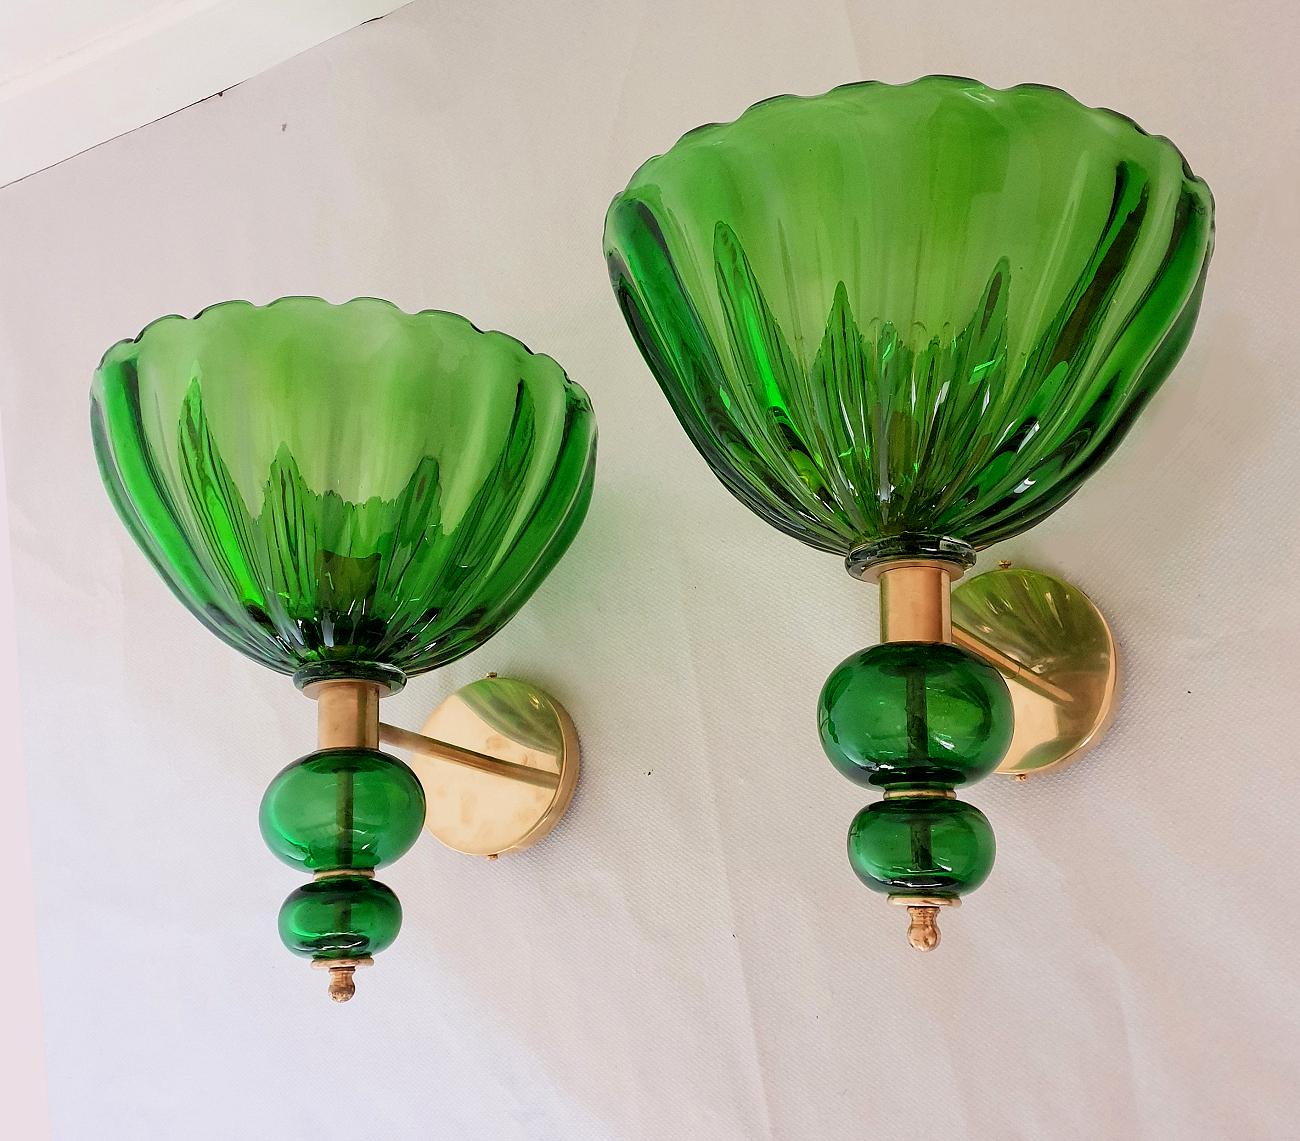 Pair of large hand blown Murano glass sconces, attributed to Barovier and Toso, Italy 1980s.
The Murano glass is thick, translucent and in a Medium Green or Bottle Green color.
The mounts are made in brass and gold plated metal.
The diameter of